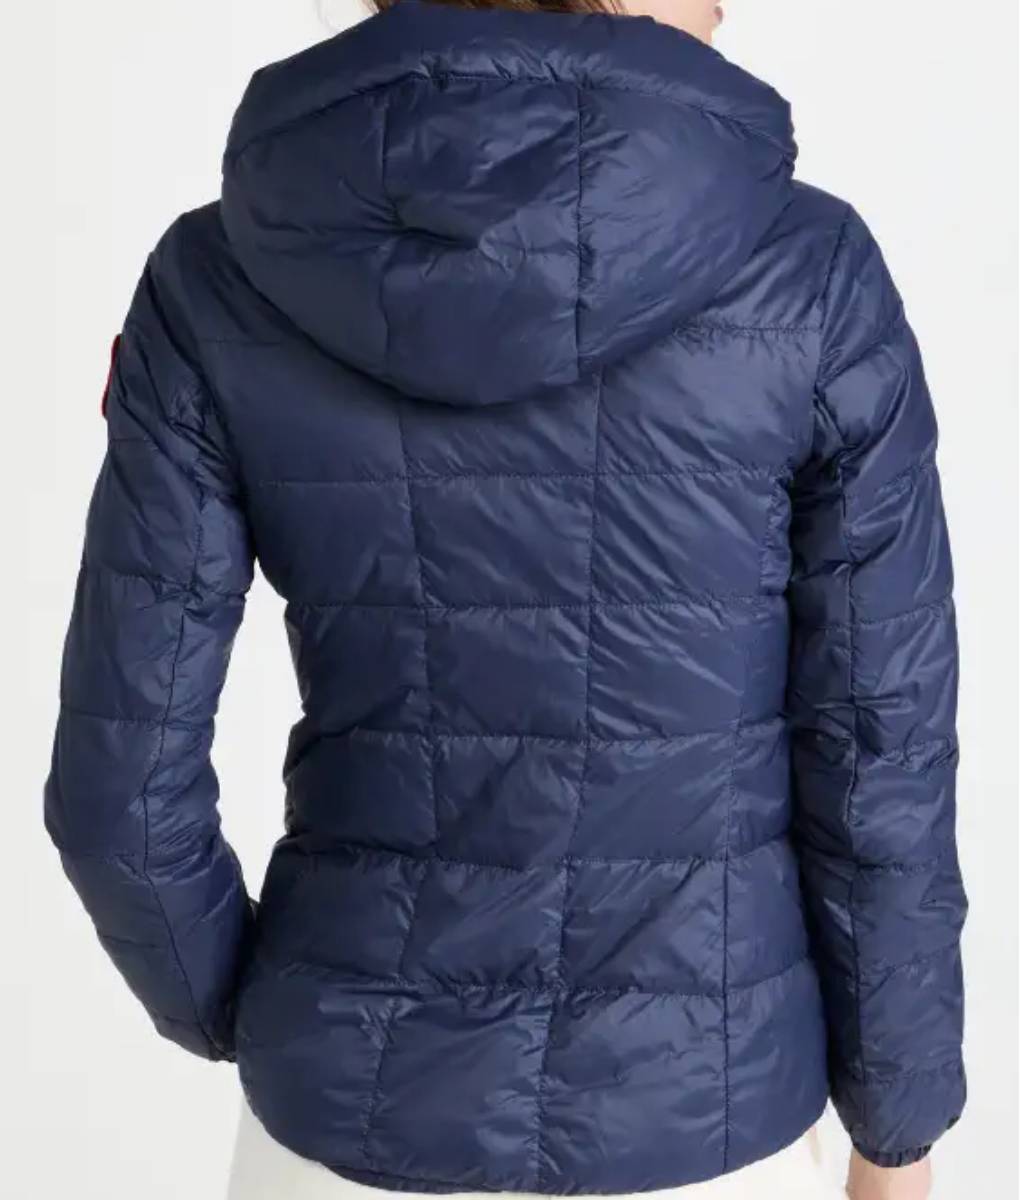 Josephine The Other Zoey Blue Puffer Jacket (4)